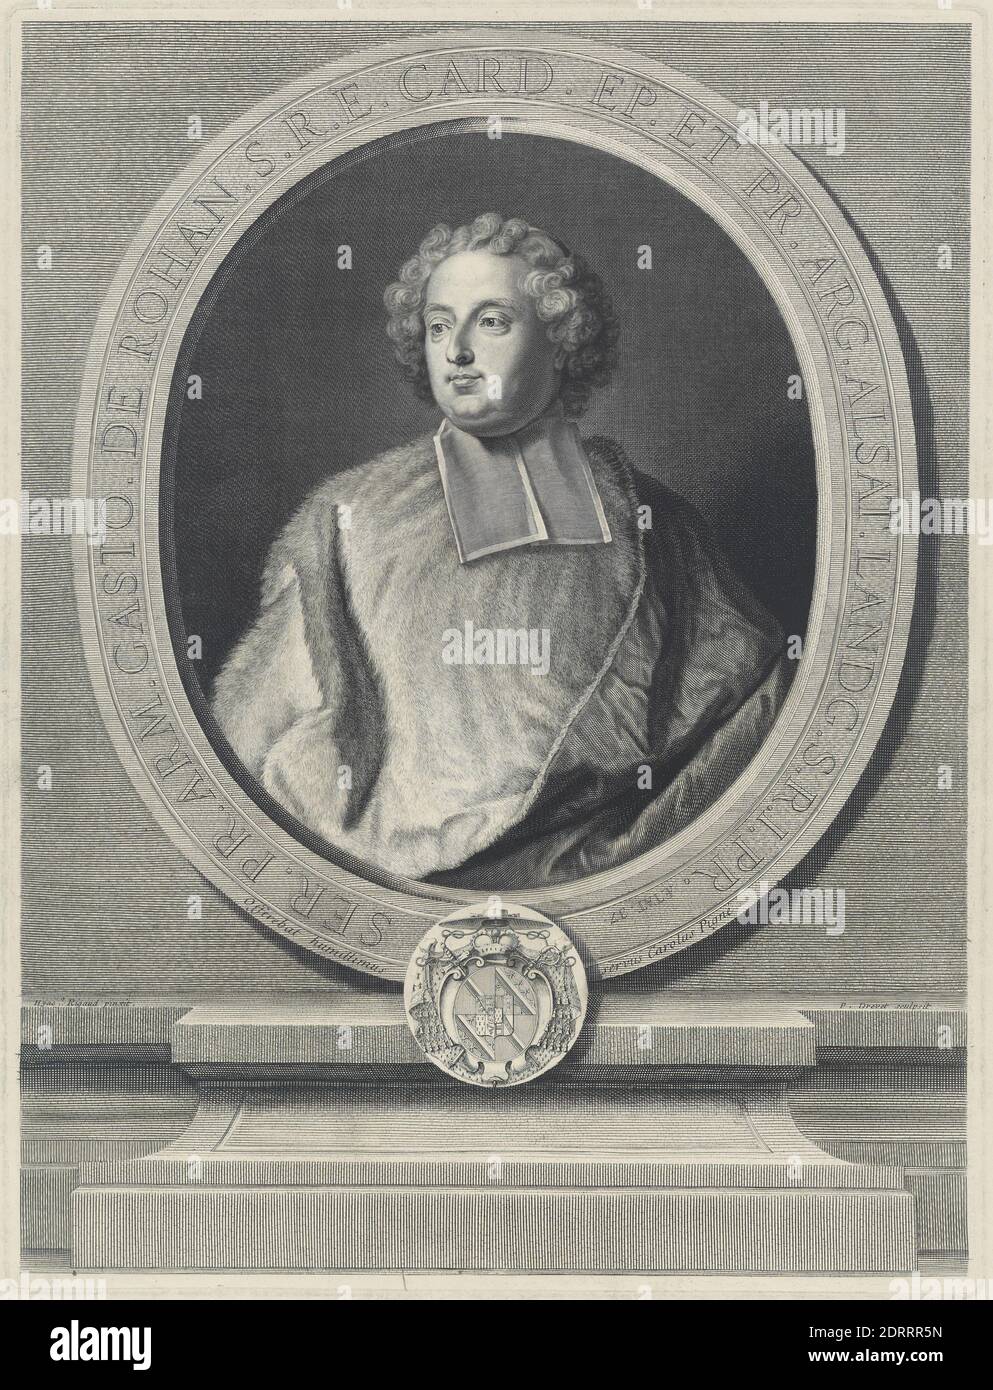 Artist: Pierre Drevet, French, 1663–1738, After: Hyacinthe Rigaud, French, 1659–1743, Gasto de Rohan S.R.E. Cardinal, Engraving, 17 13/16 × 13 1/2 in. (45.3 × 34.3 cm), Made in France, French, 17th century, Works on Paper - Prints Stock Photo